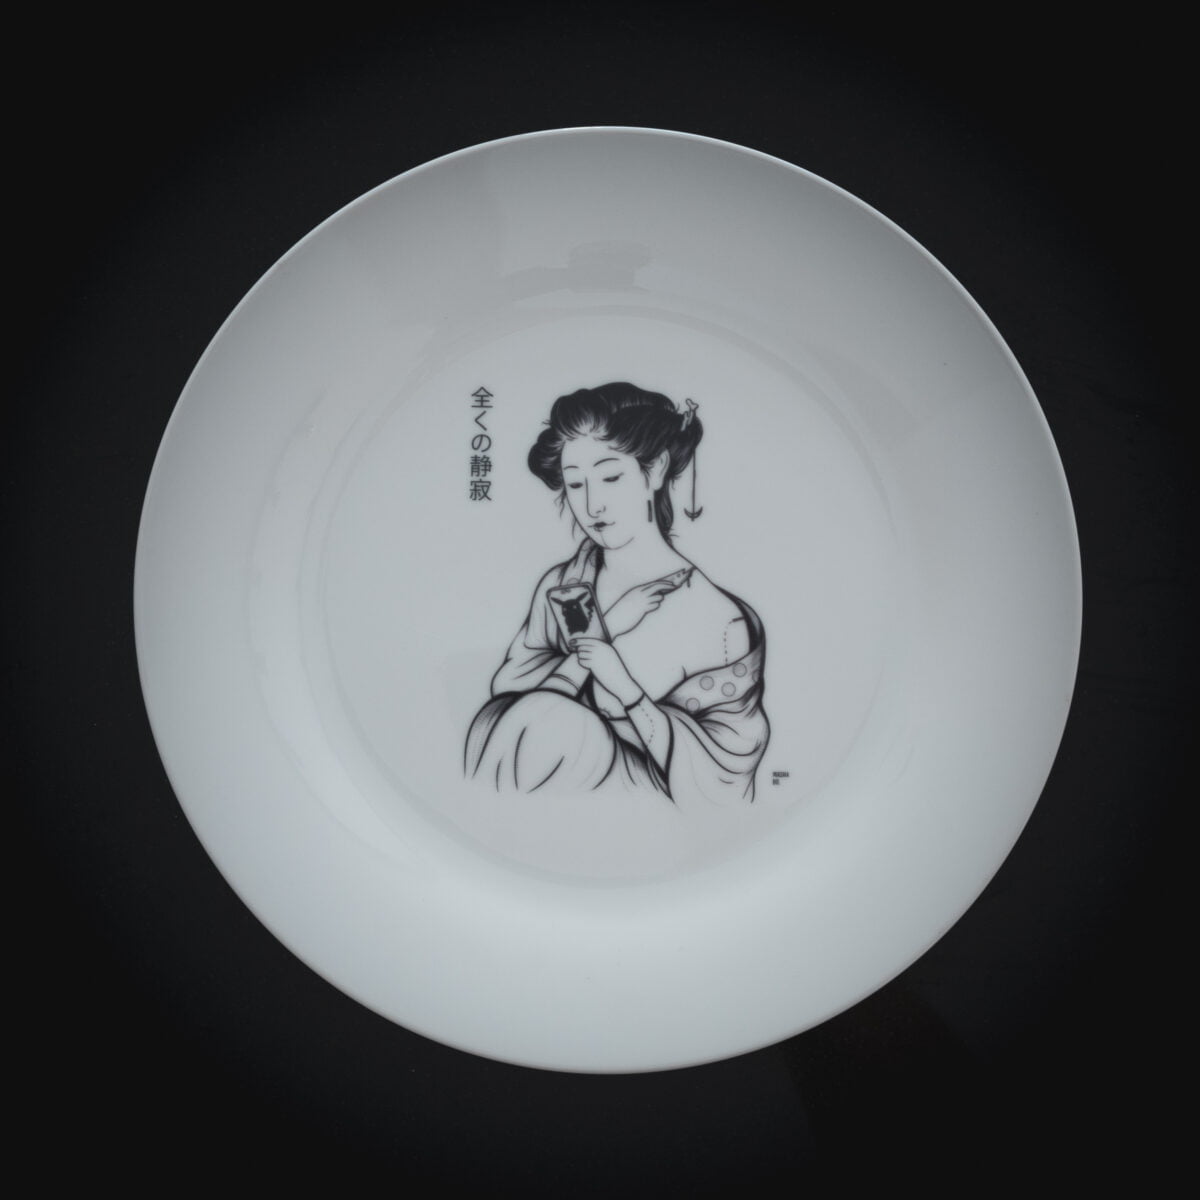 Original plate from contemporary artist - Masha Bo for sell. Plate with image woman with naked shoulder looking into her mirror reflection.